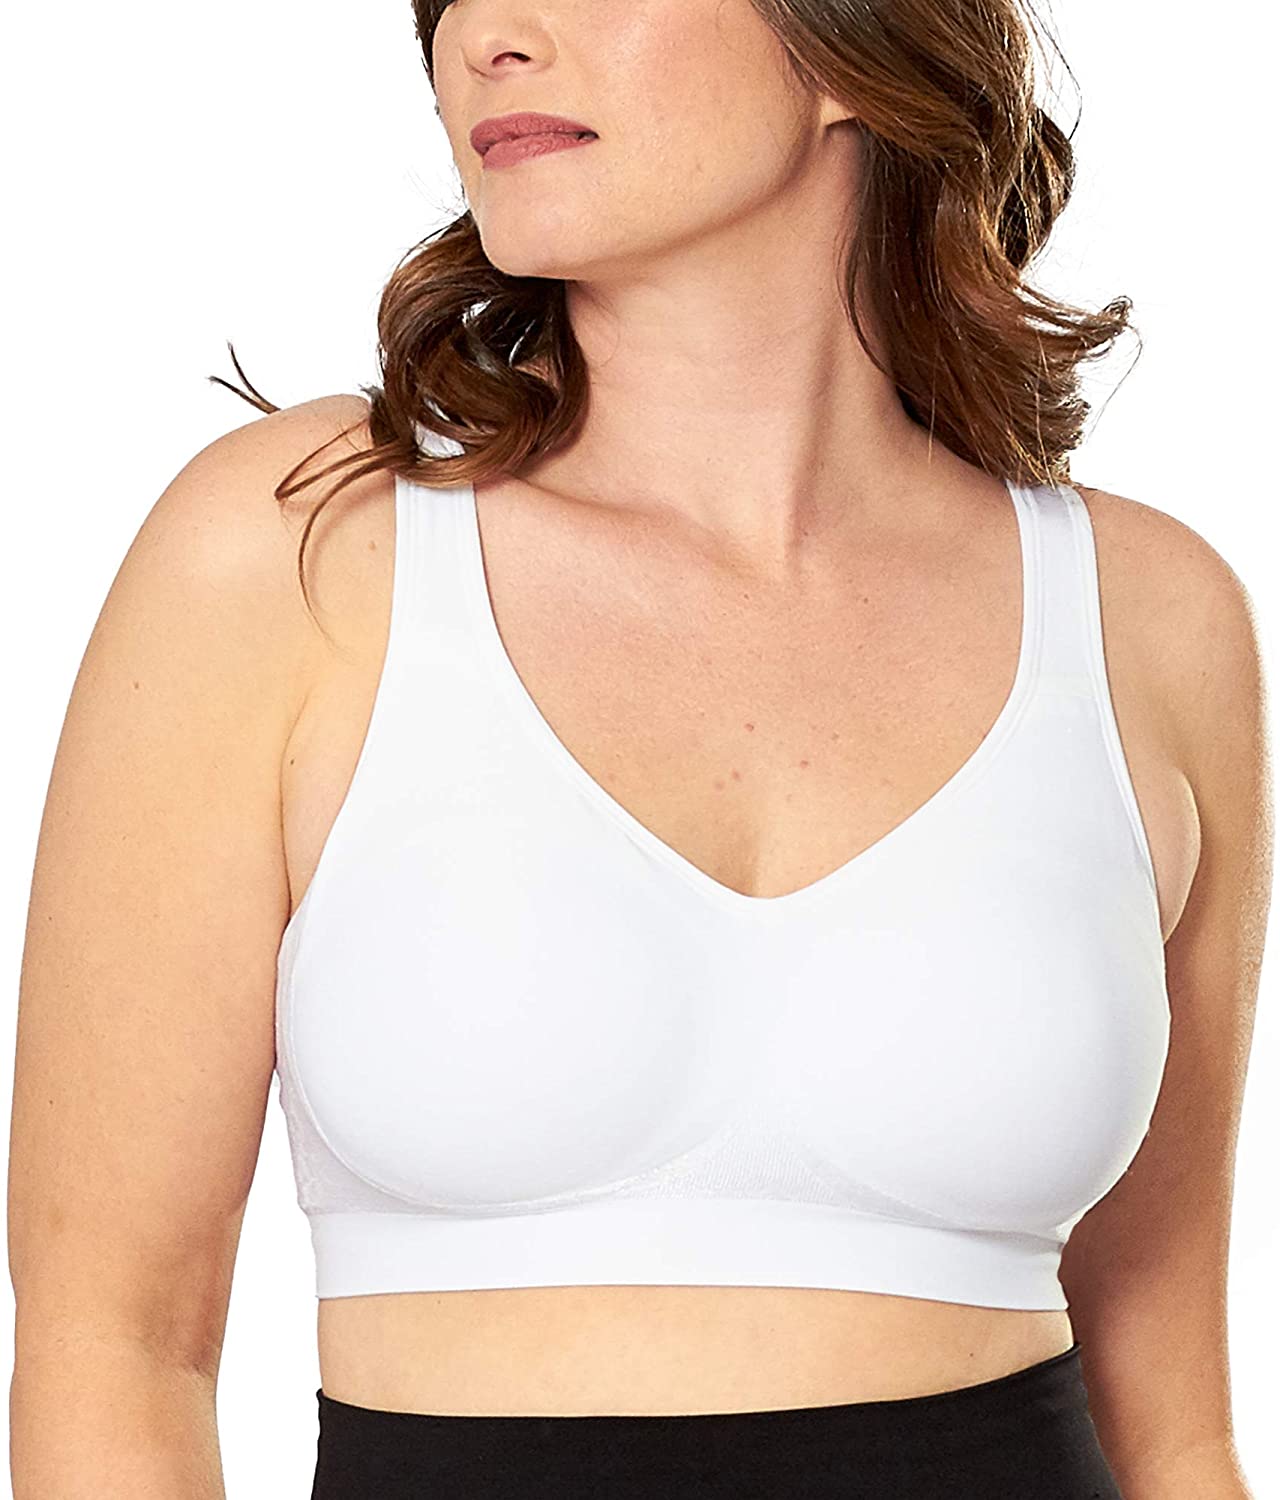  Customer reviews: SHAPERMINT Compression Bras for Women -  Wirefree, Small to Plus Size, Black